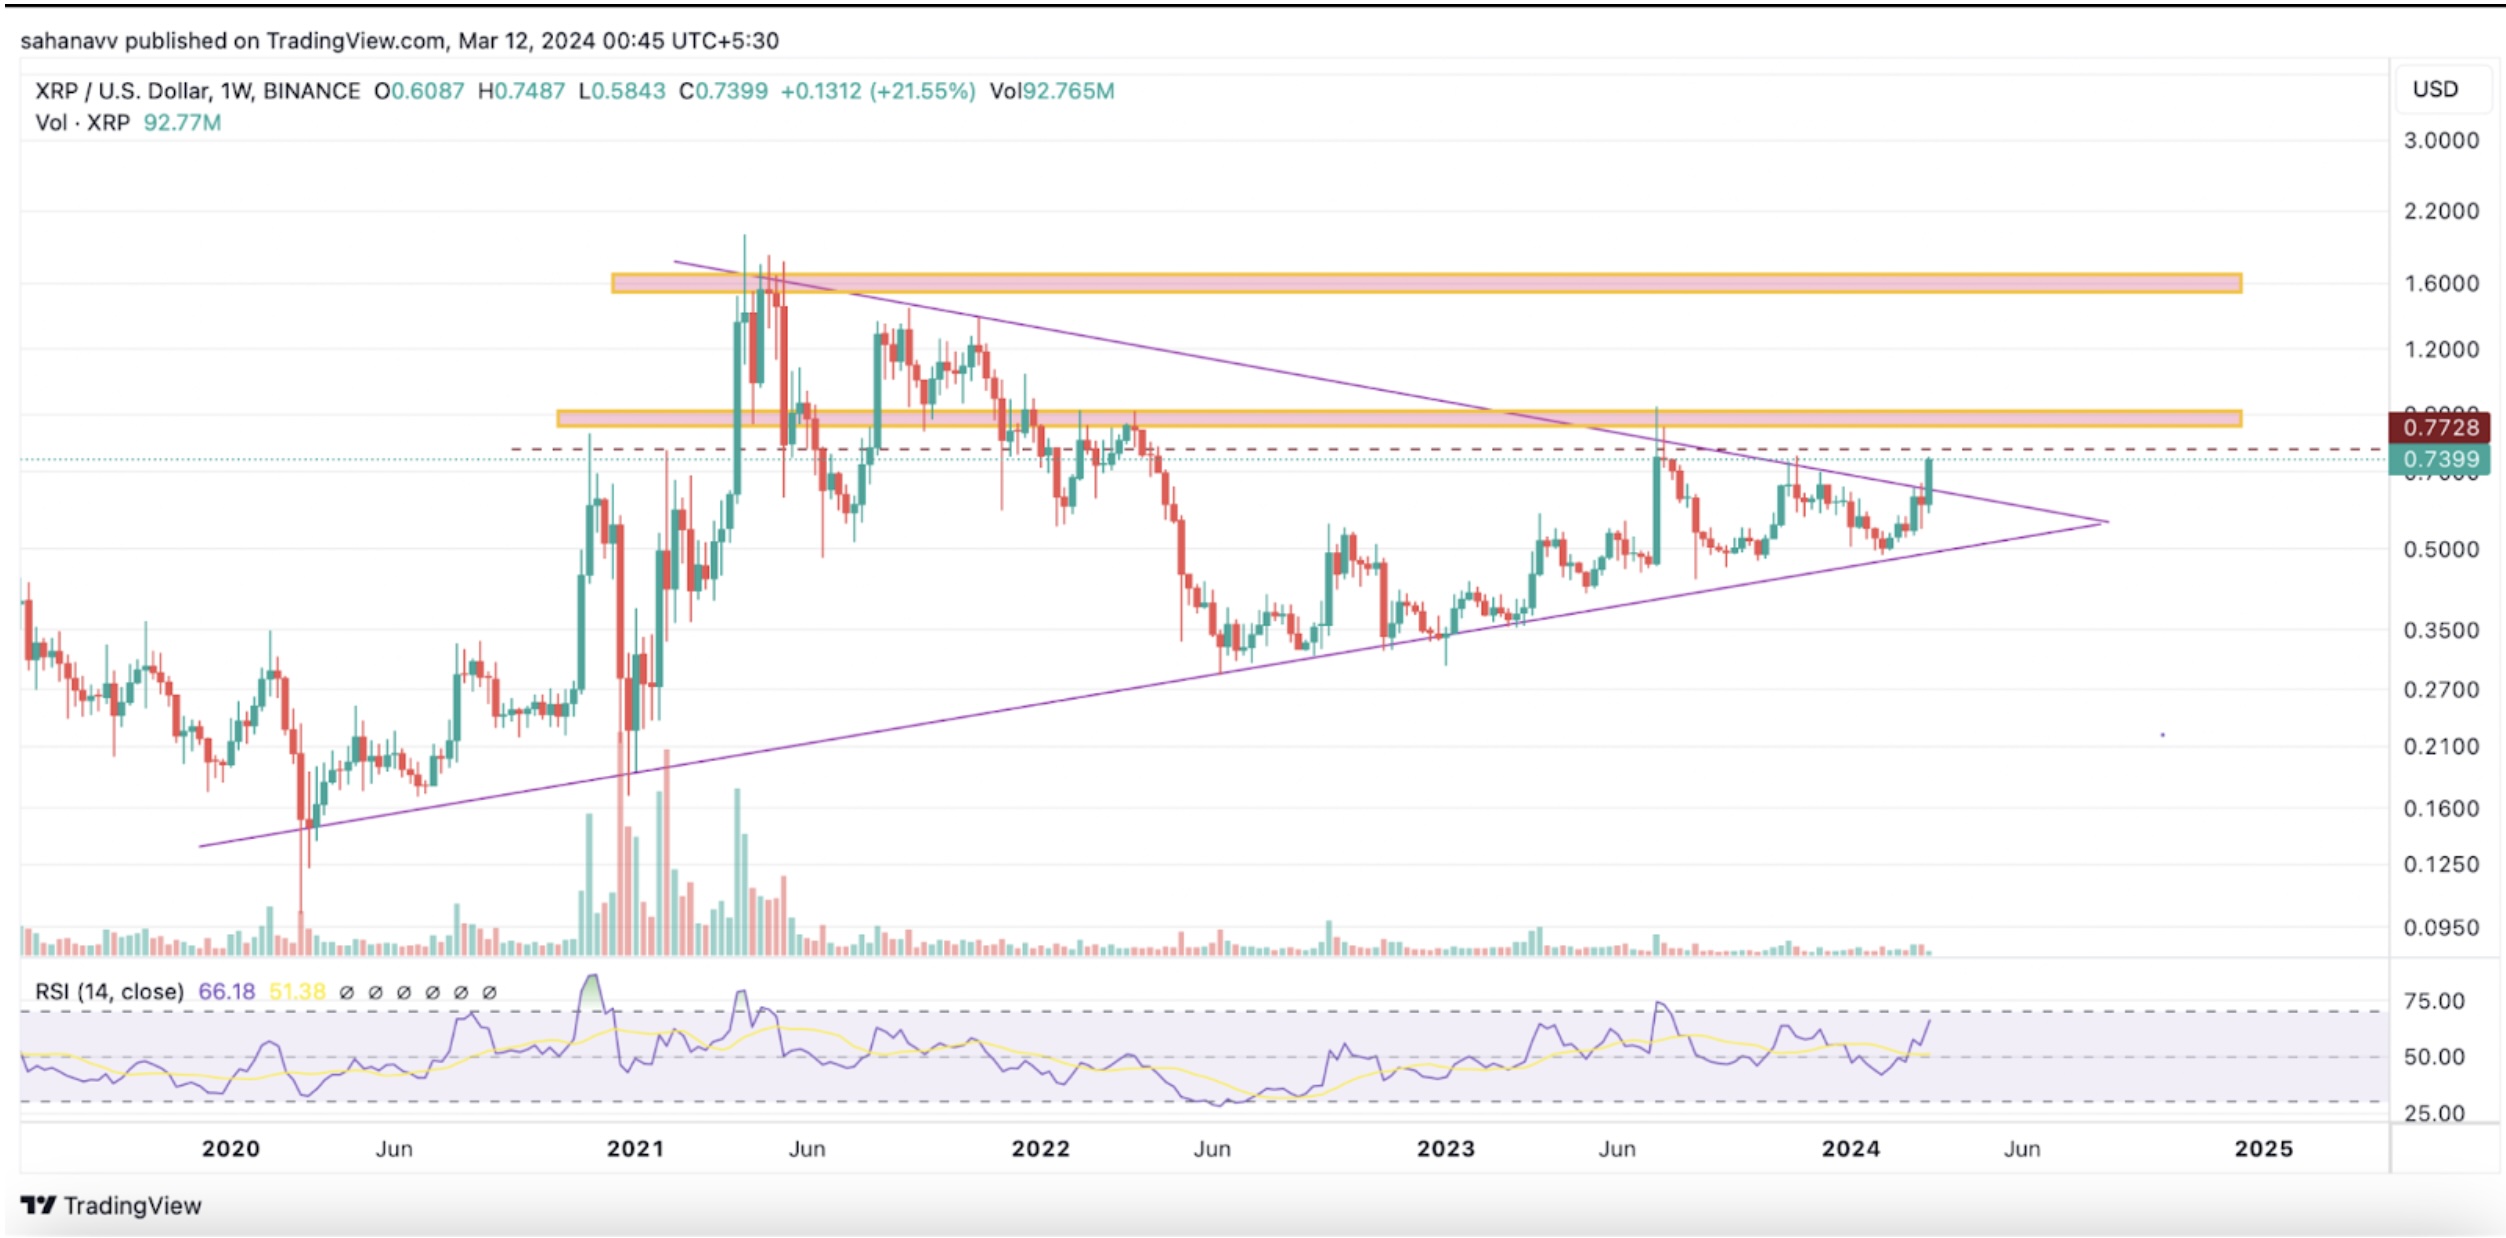 Ripple (XRP) Price Breaks Above the Multi-Year Consolidation – Here Is What It Means for the Crypto Space - The Daily Hodl